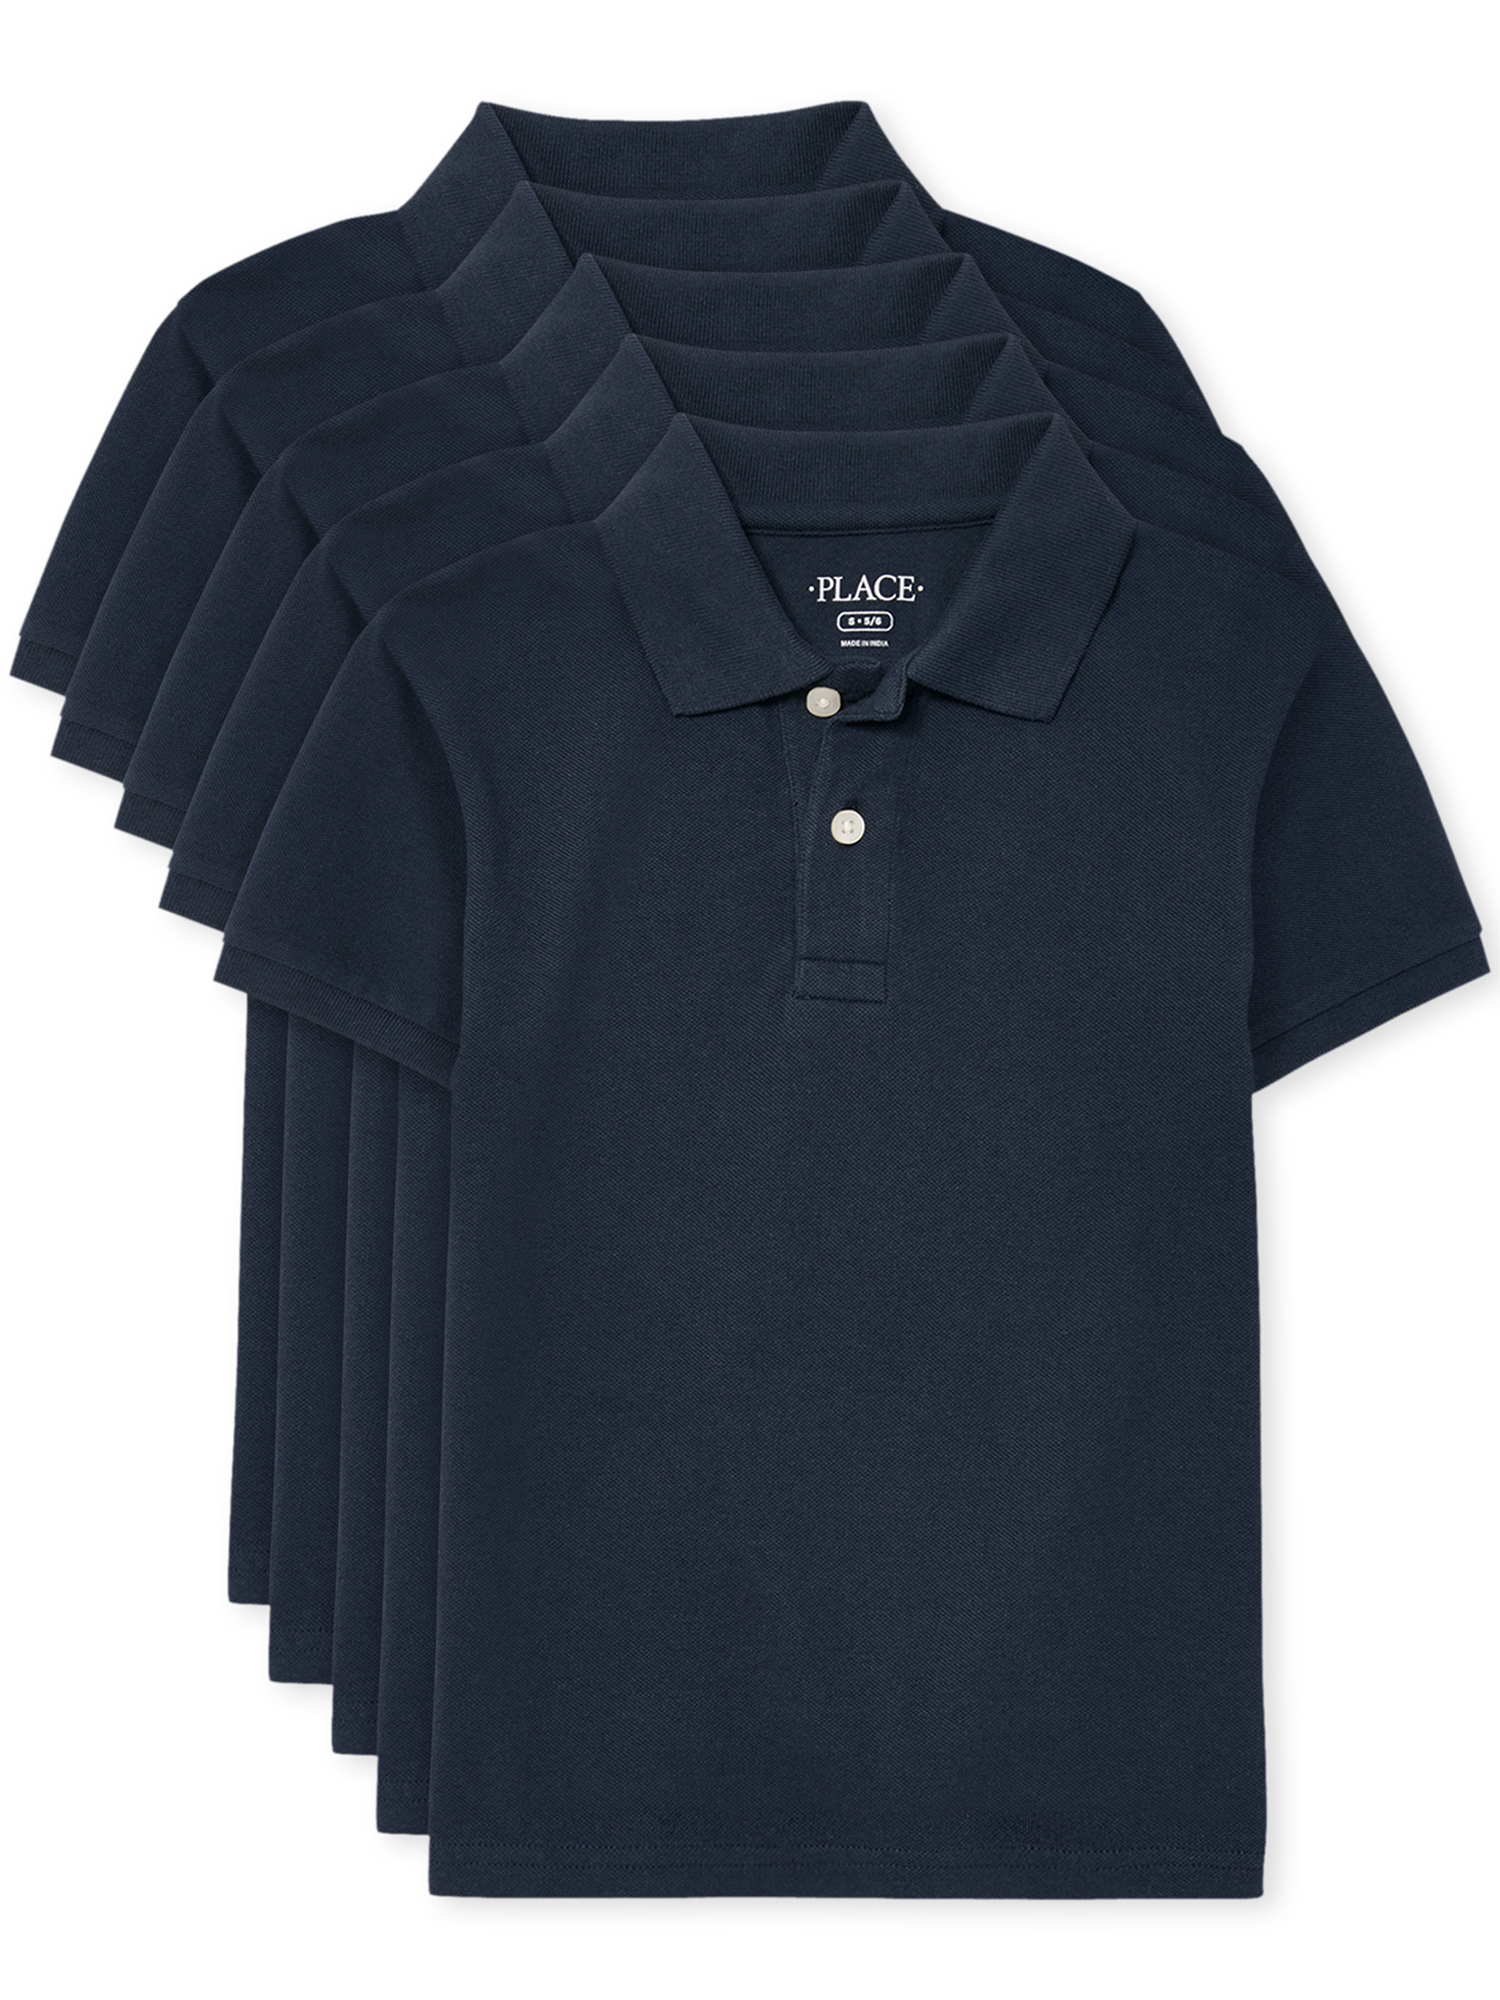 The Children's Place Big Boy's Short-Sleeve Polo, 5-Pack - image 1 of 4